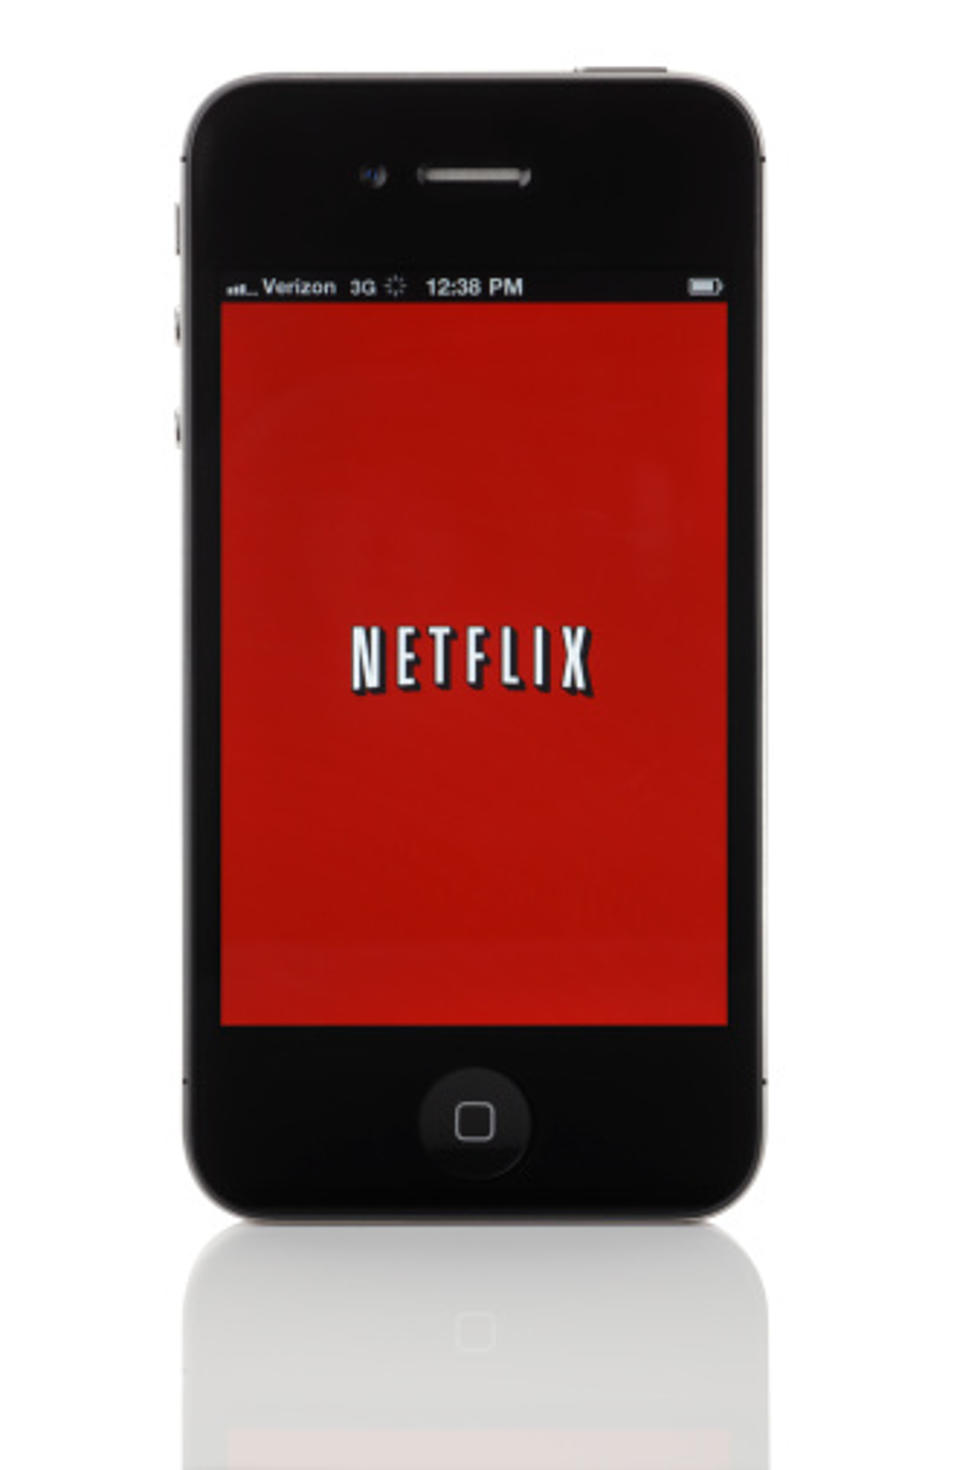 What Would It Take For Illinoisans To Dump Netflix?